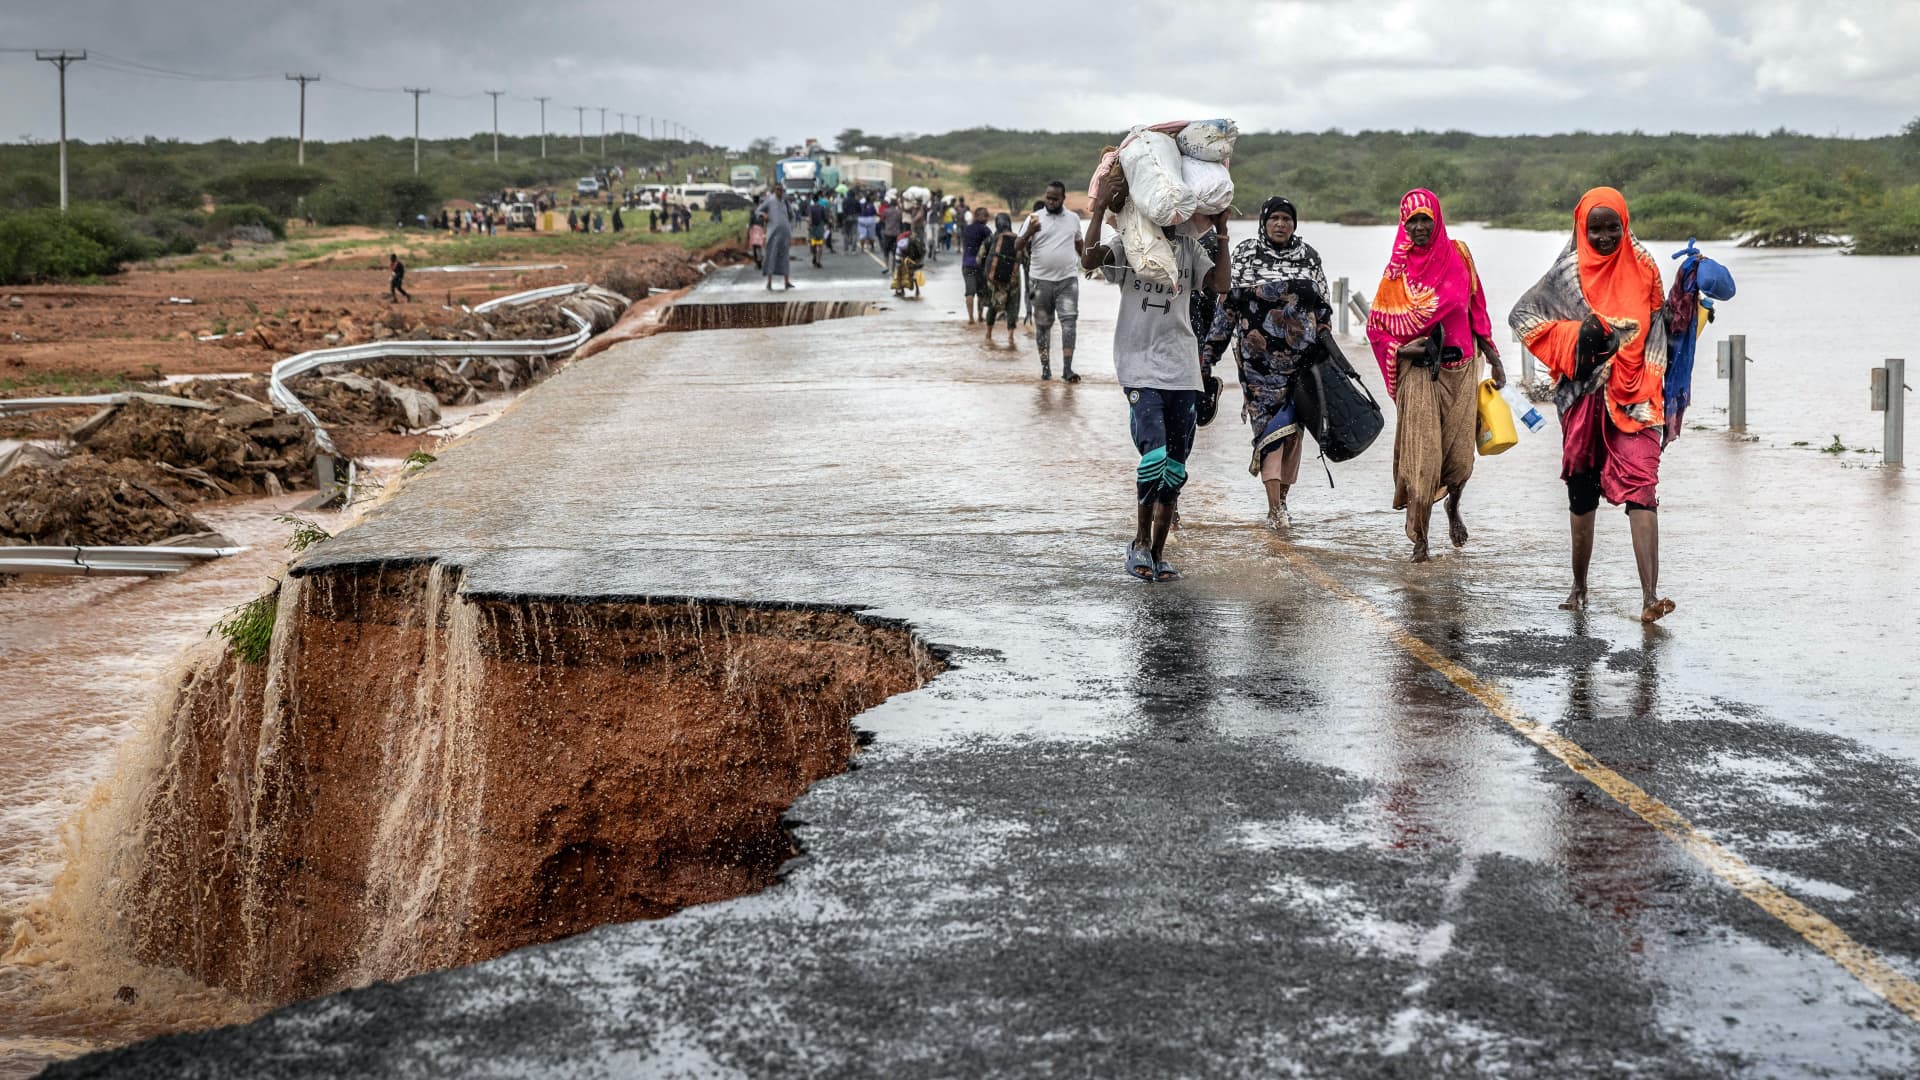 People carry their belongings while crossing the section of a road collapsing due to flash floods at the Mwingi-Garissa Road near Garissa on November 22, 2023. The Horn of Africa is experiencing torrential rainfall and floods linked to El Nino climate pattern. Several communities are isolated as thousands of homes have been destroyed or damaged by floods that struck at least 33 of Kenya's 47 counties, killing more than 70 people and displacing many across the East African nation. (Photo by LUIS TATO / AFP) (Photo by LUIS TATO/AFP via Getty Images)